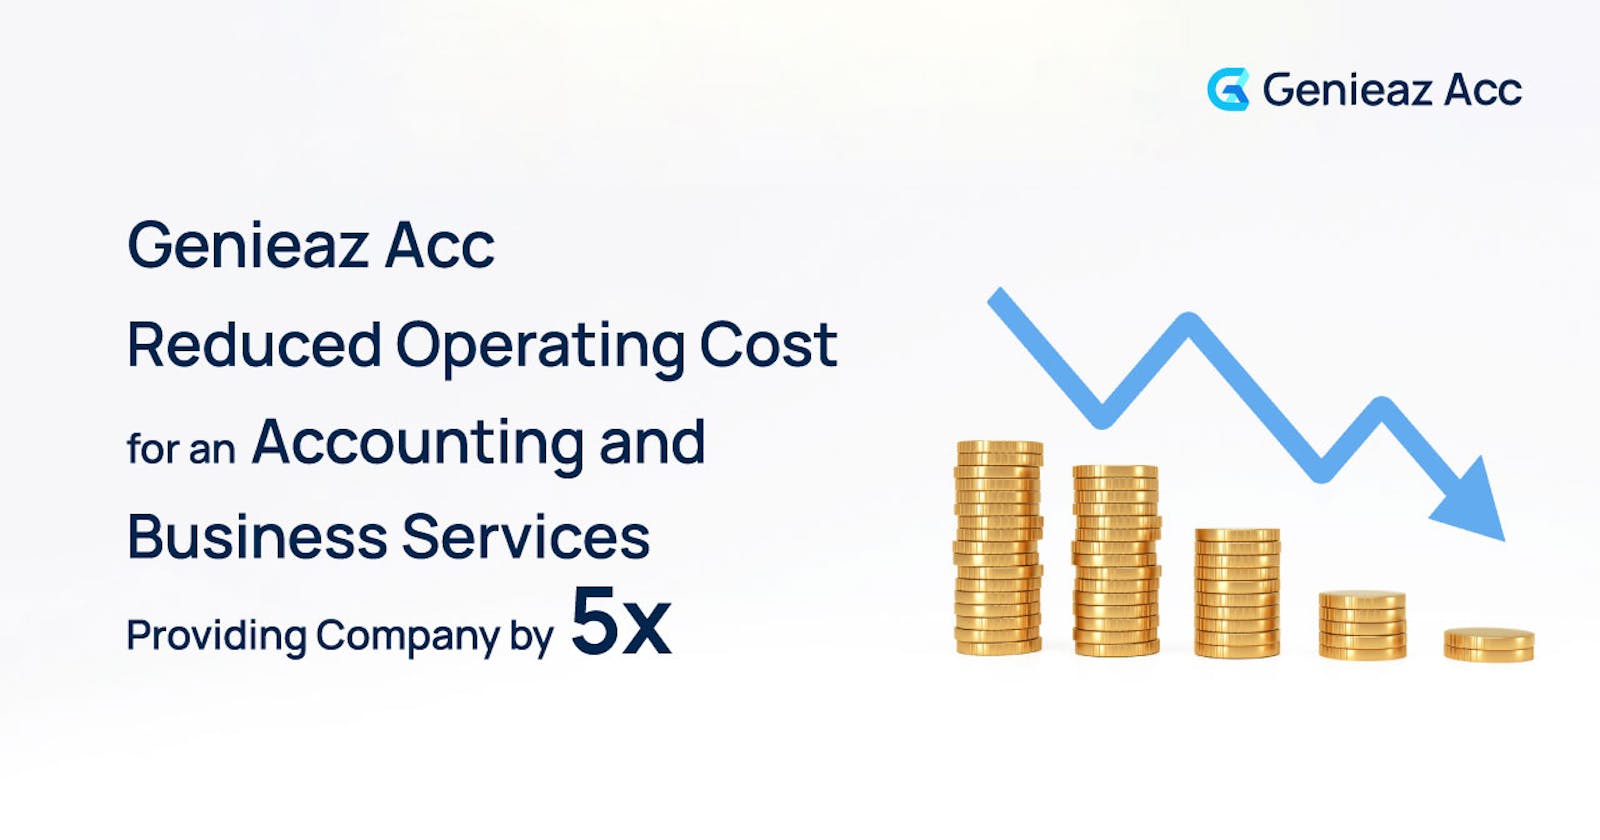 Genieaz Acc Reduced Operating Cost for an Accounting and Business Services Providing Company by 5x